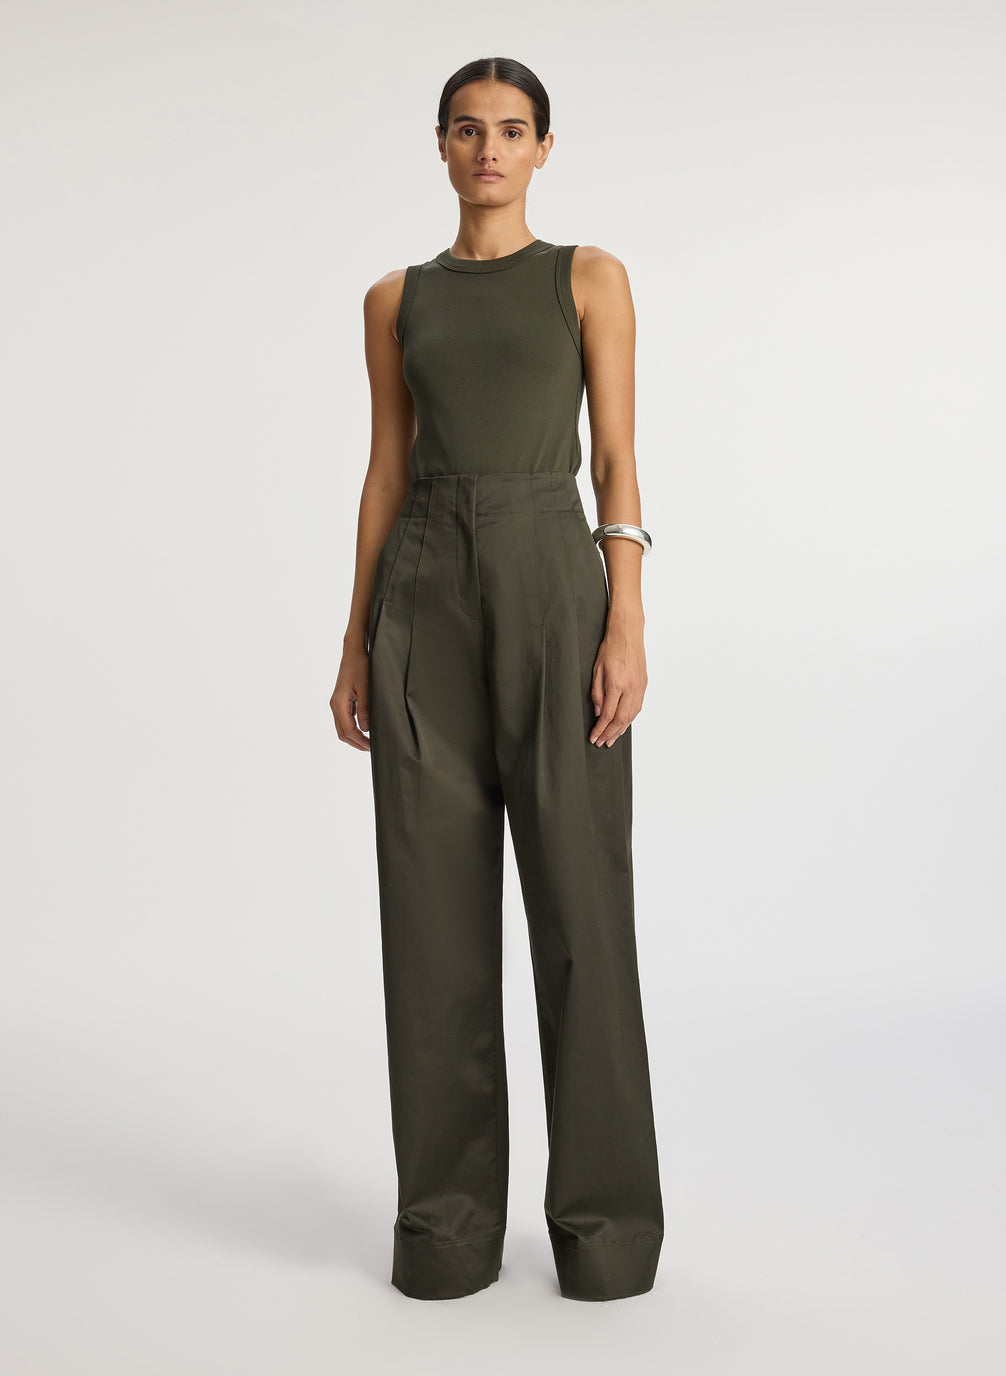 front view of woman wearing olive green tank top and olive green wide leg sateen pants